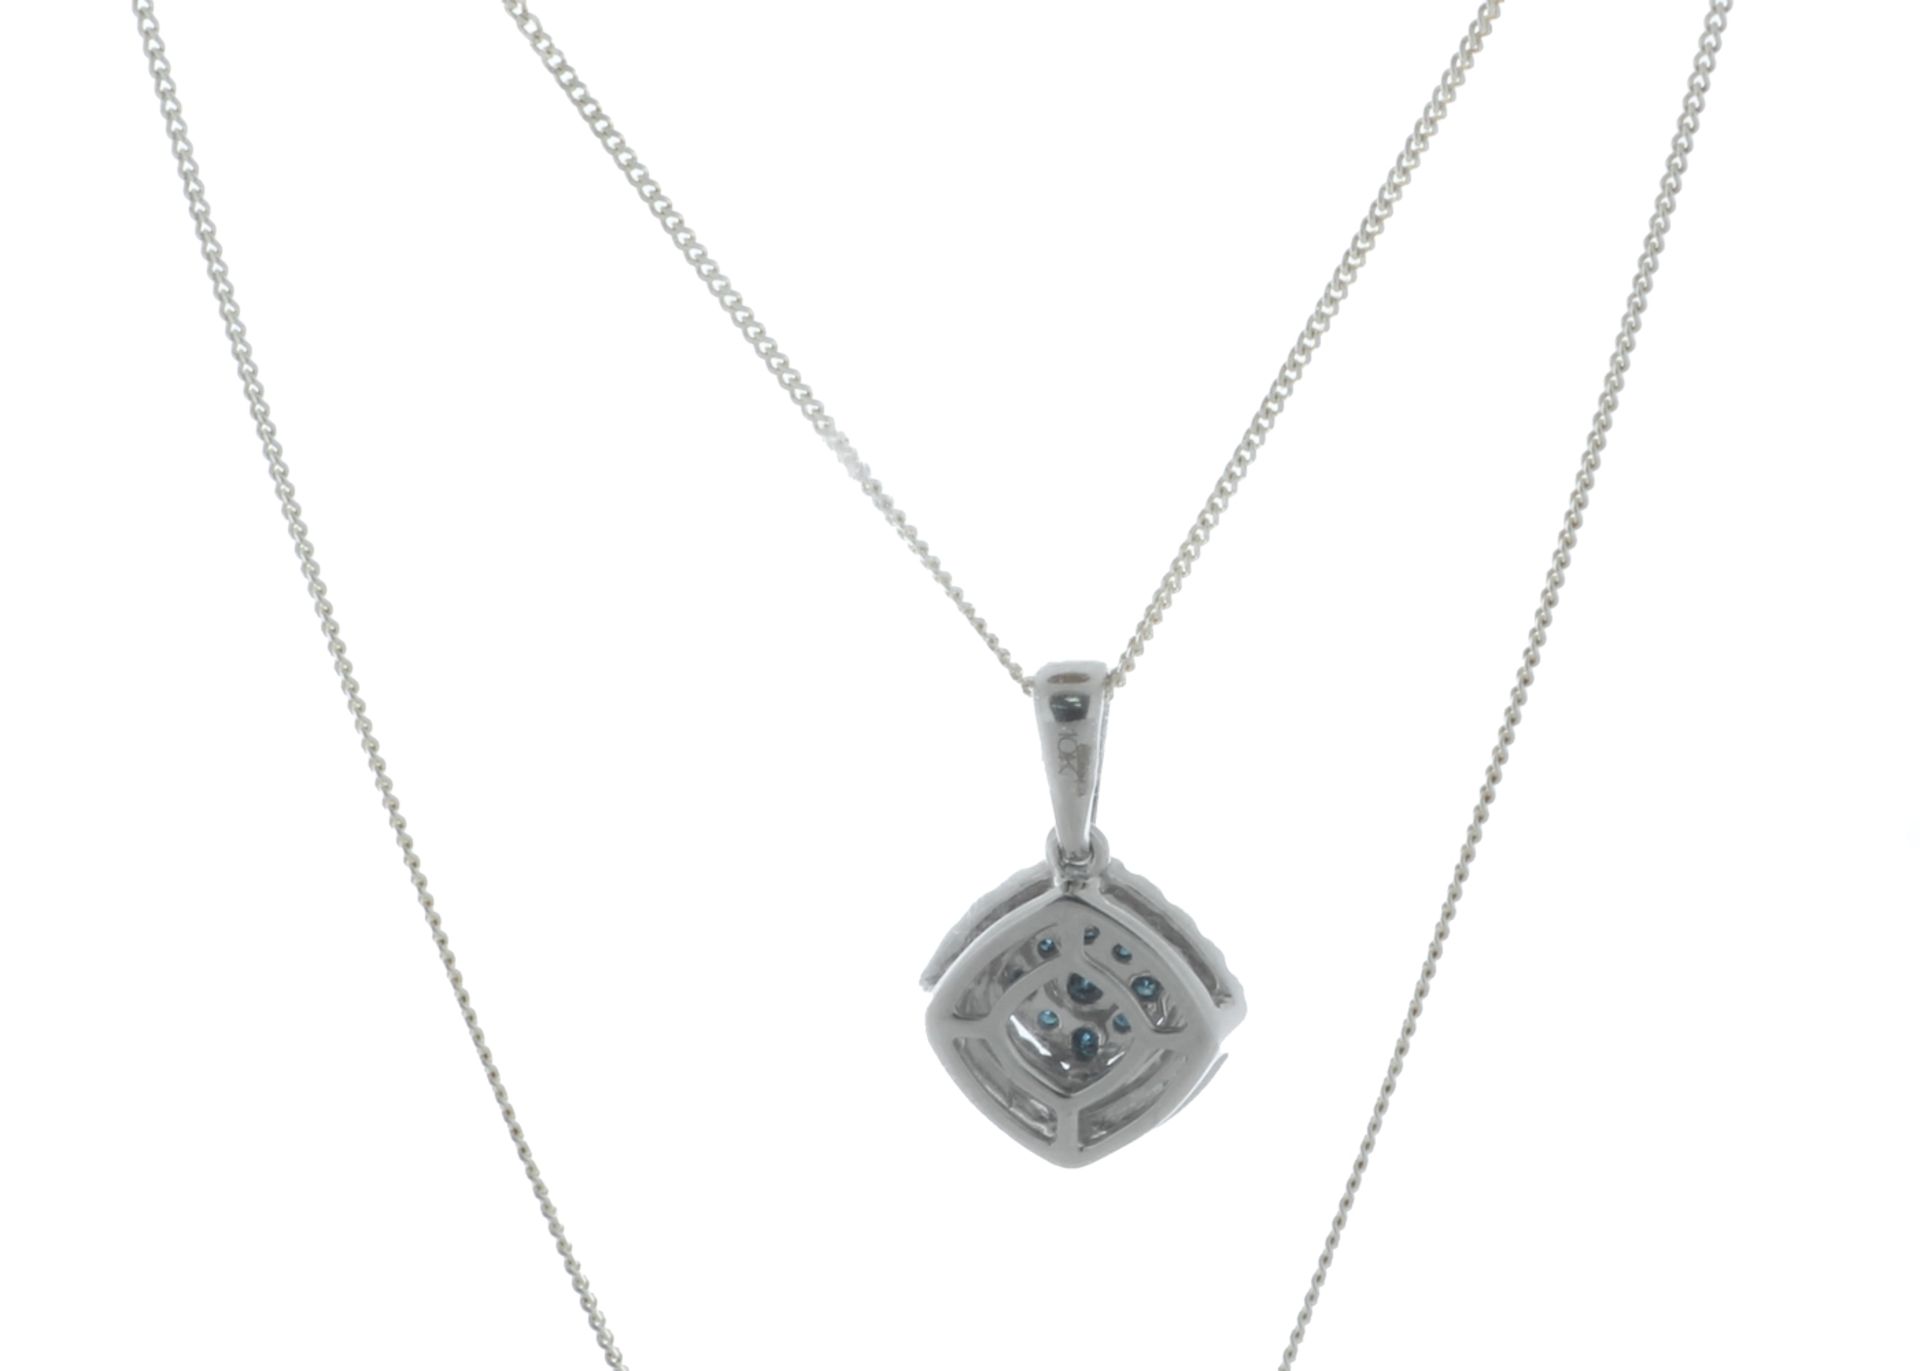 9ct White Gold Diamond Pendant 0.15 Carats - Valued by GIE £810.00 - 9ct White Gold Diamond - Image 3 of 4